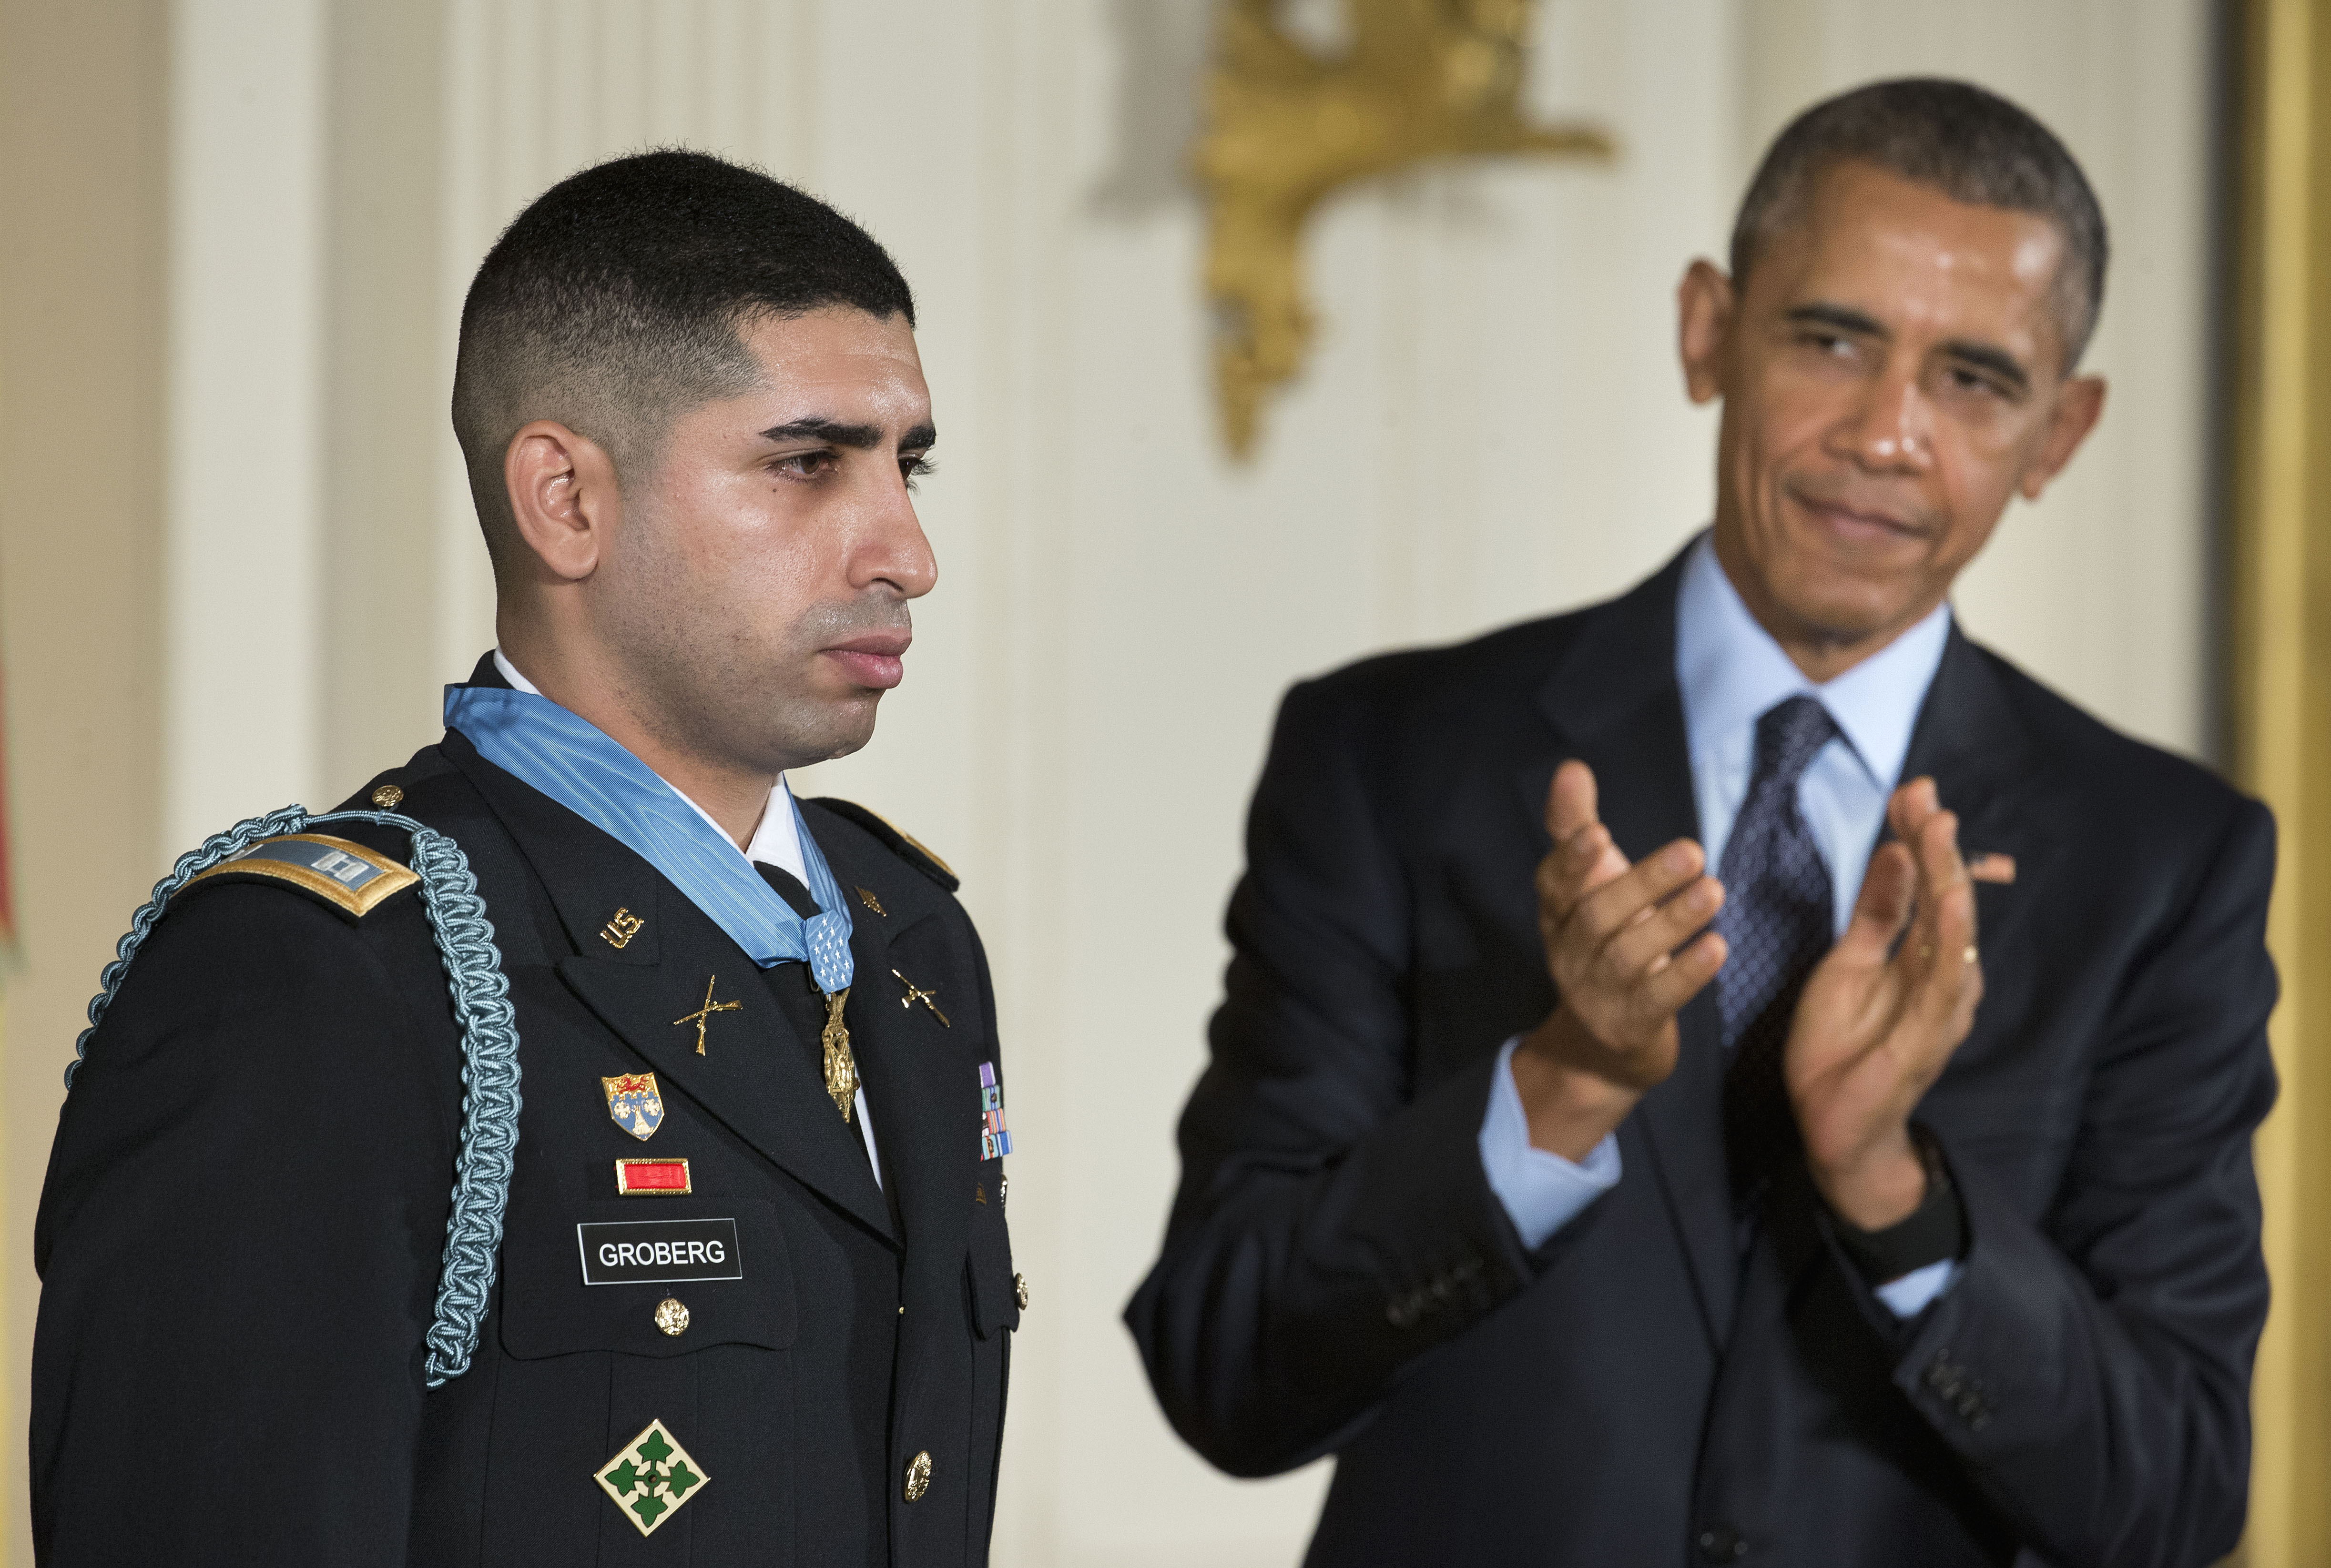 President Barack Obama applauds after bestowing the nation's highest military honor, the Medal of Honor to Florent Groberg during a ceremony in the East Room of the White House in Washington, Thursday, Nov. 12, 2015. The former Army captain received the medal after he tackled a suicide bomber while serving in Afghanistan. (AP Photo/Pablo Martinez Monsivais)